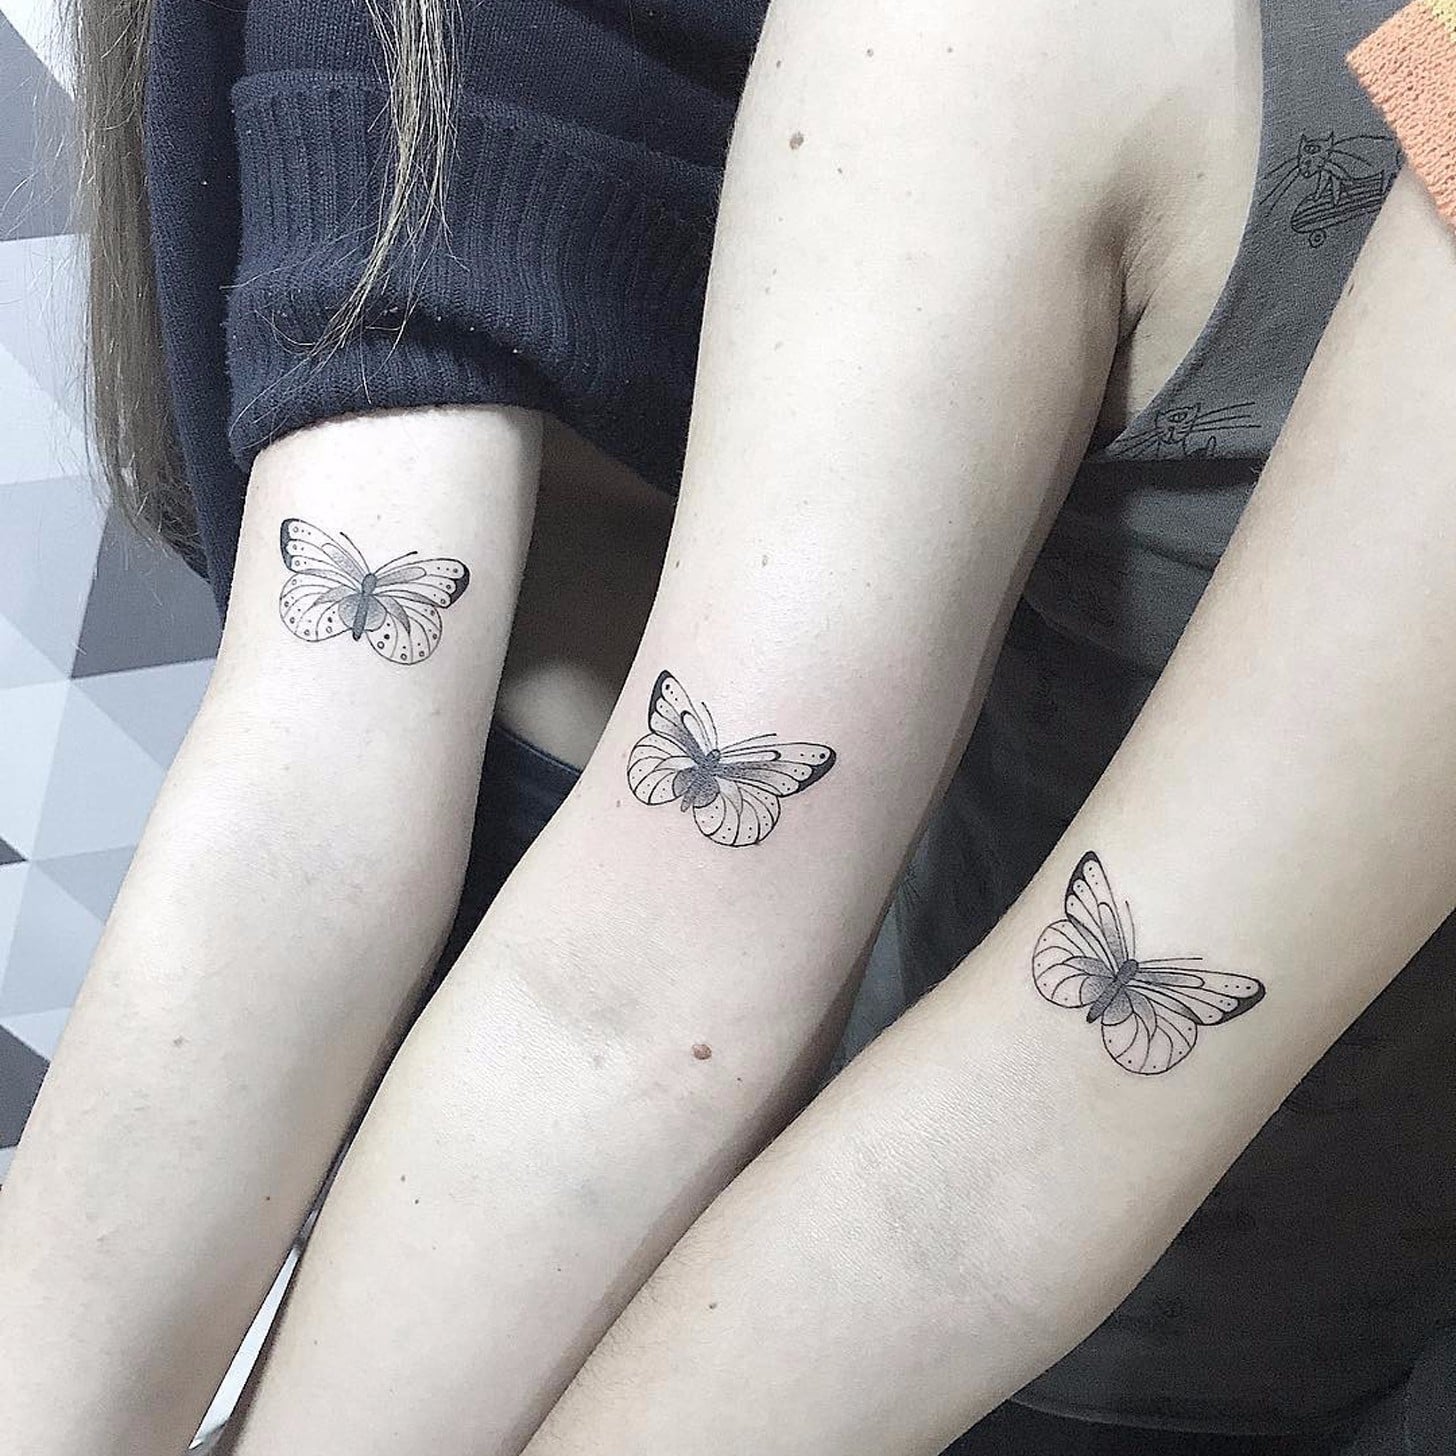 95 Gorgeous Butterfly Tattoos The Beauty and the Significance